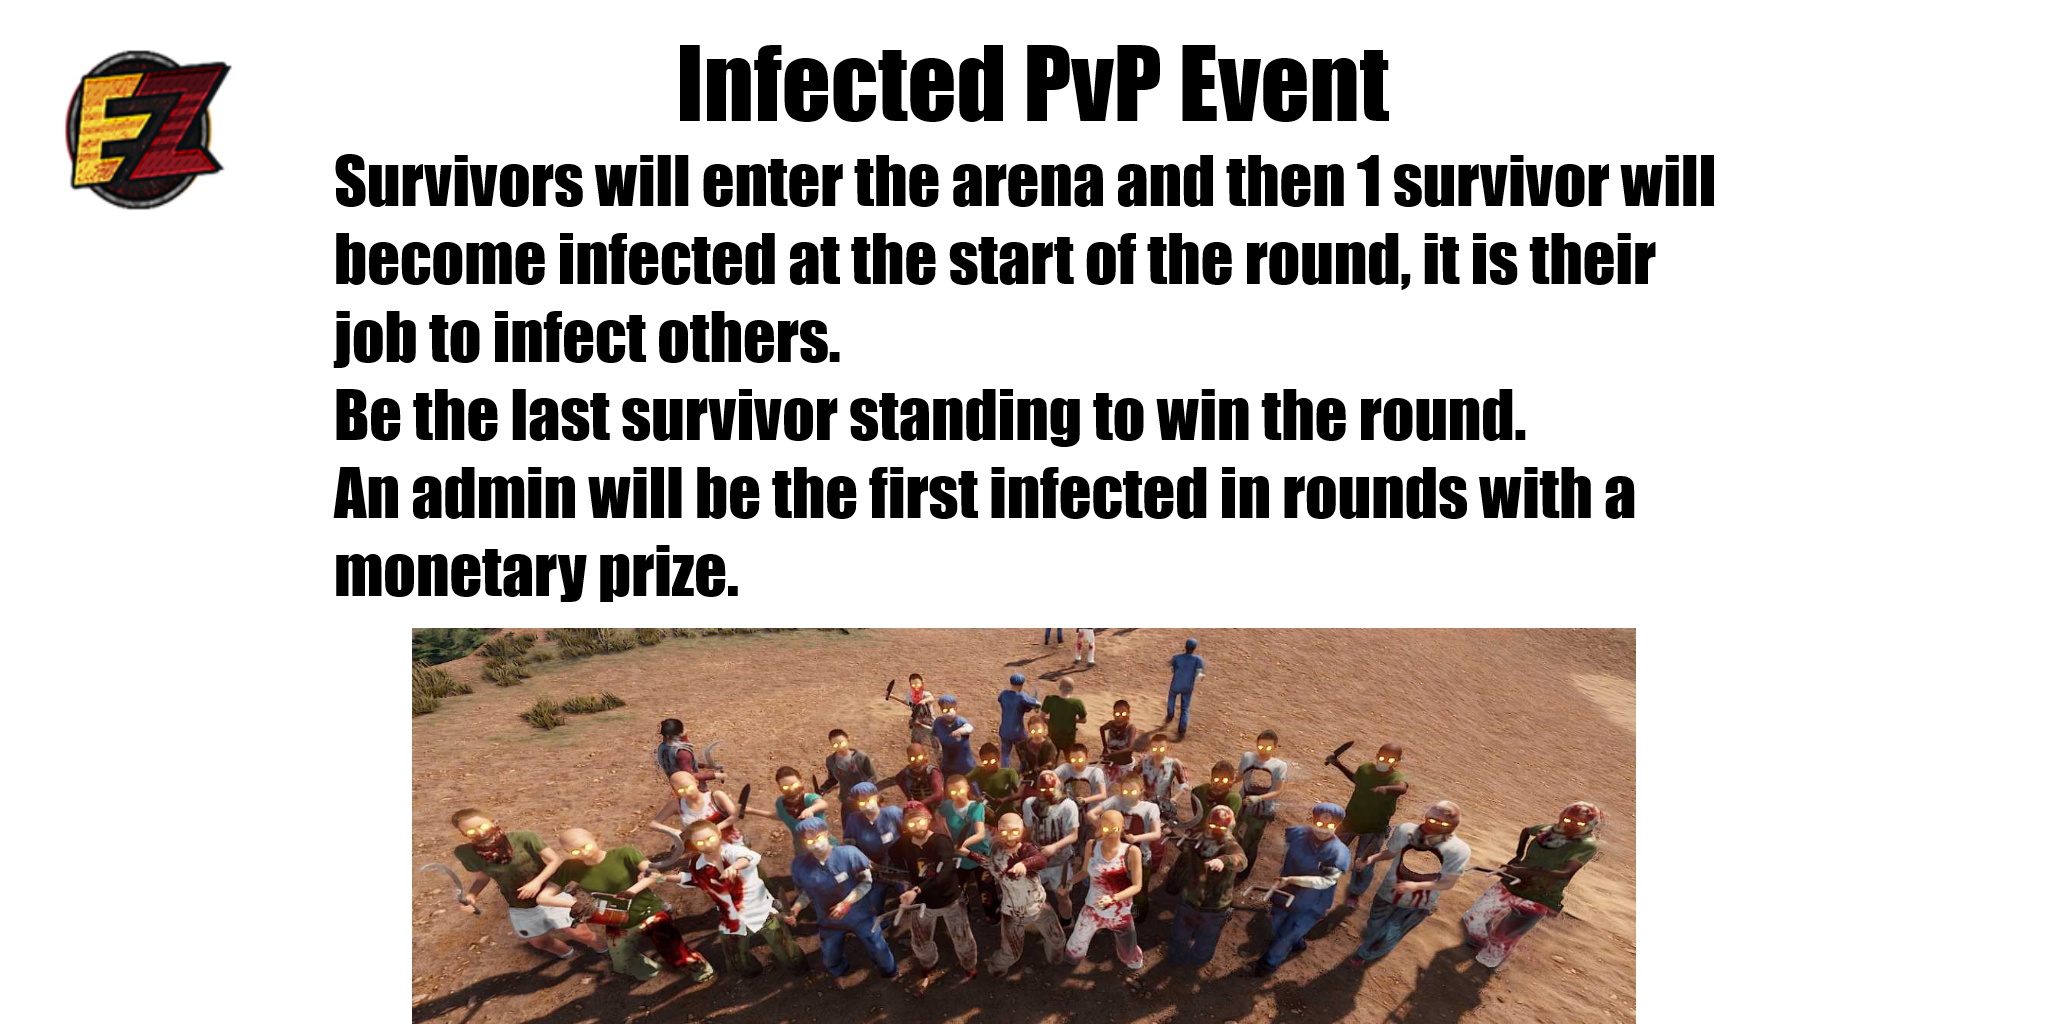 EU Scourge Infected PvP Event